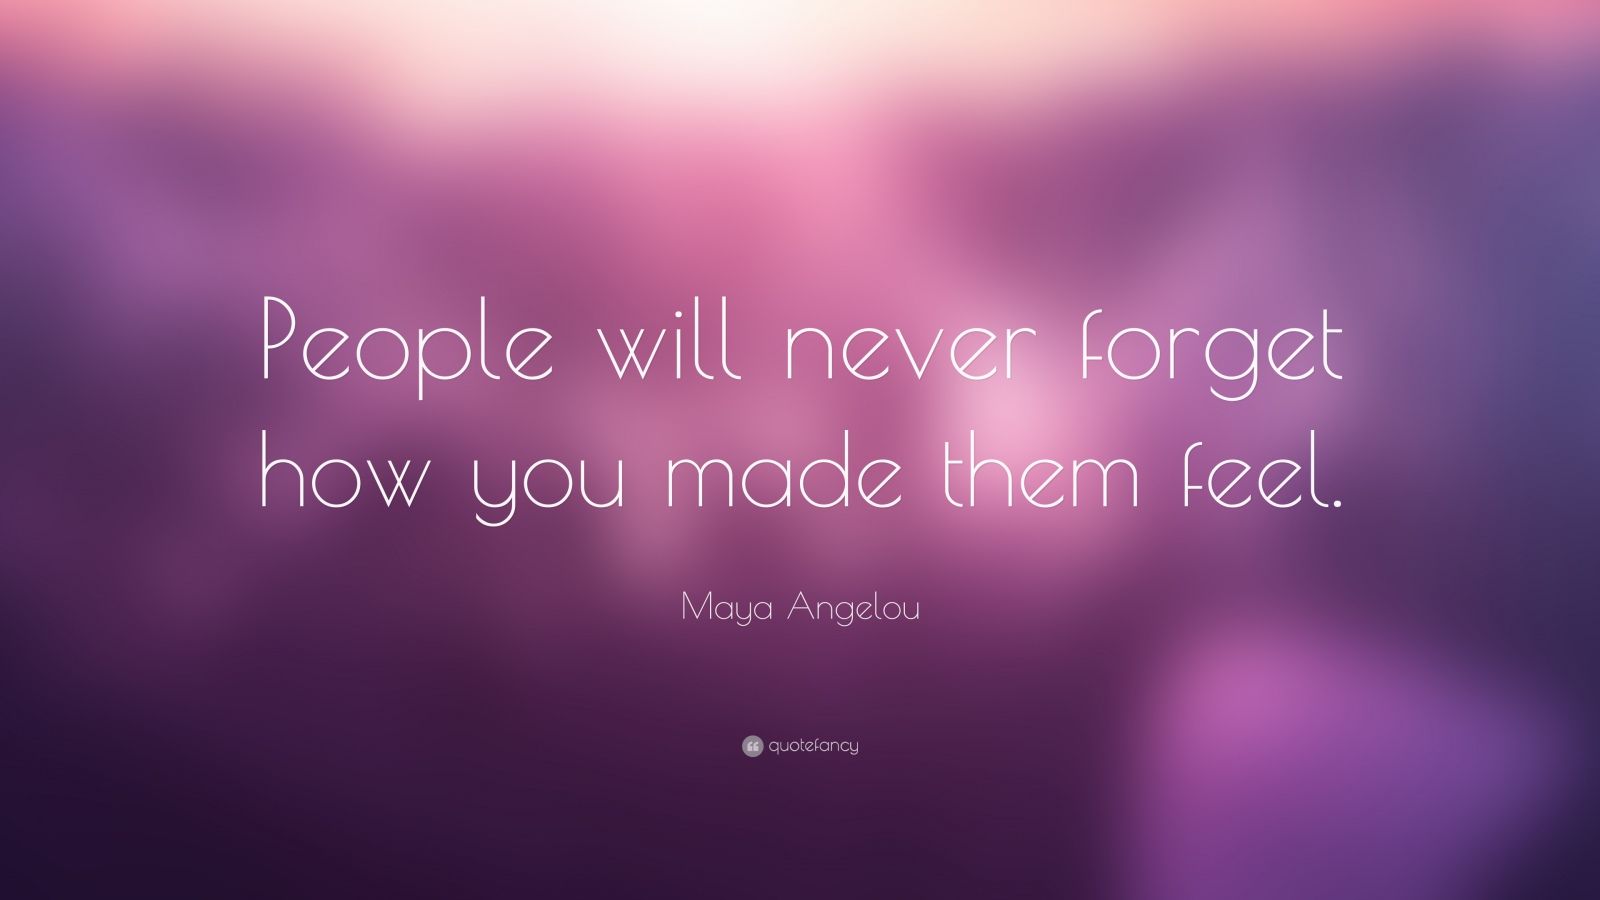 Maya Angelou Quote People will never forget how you made 